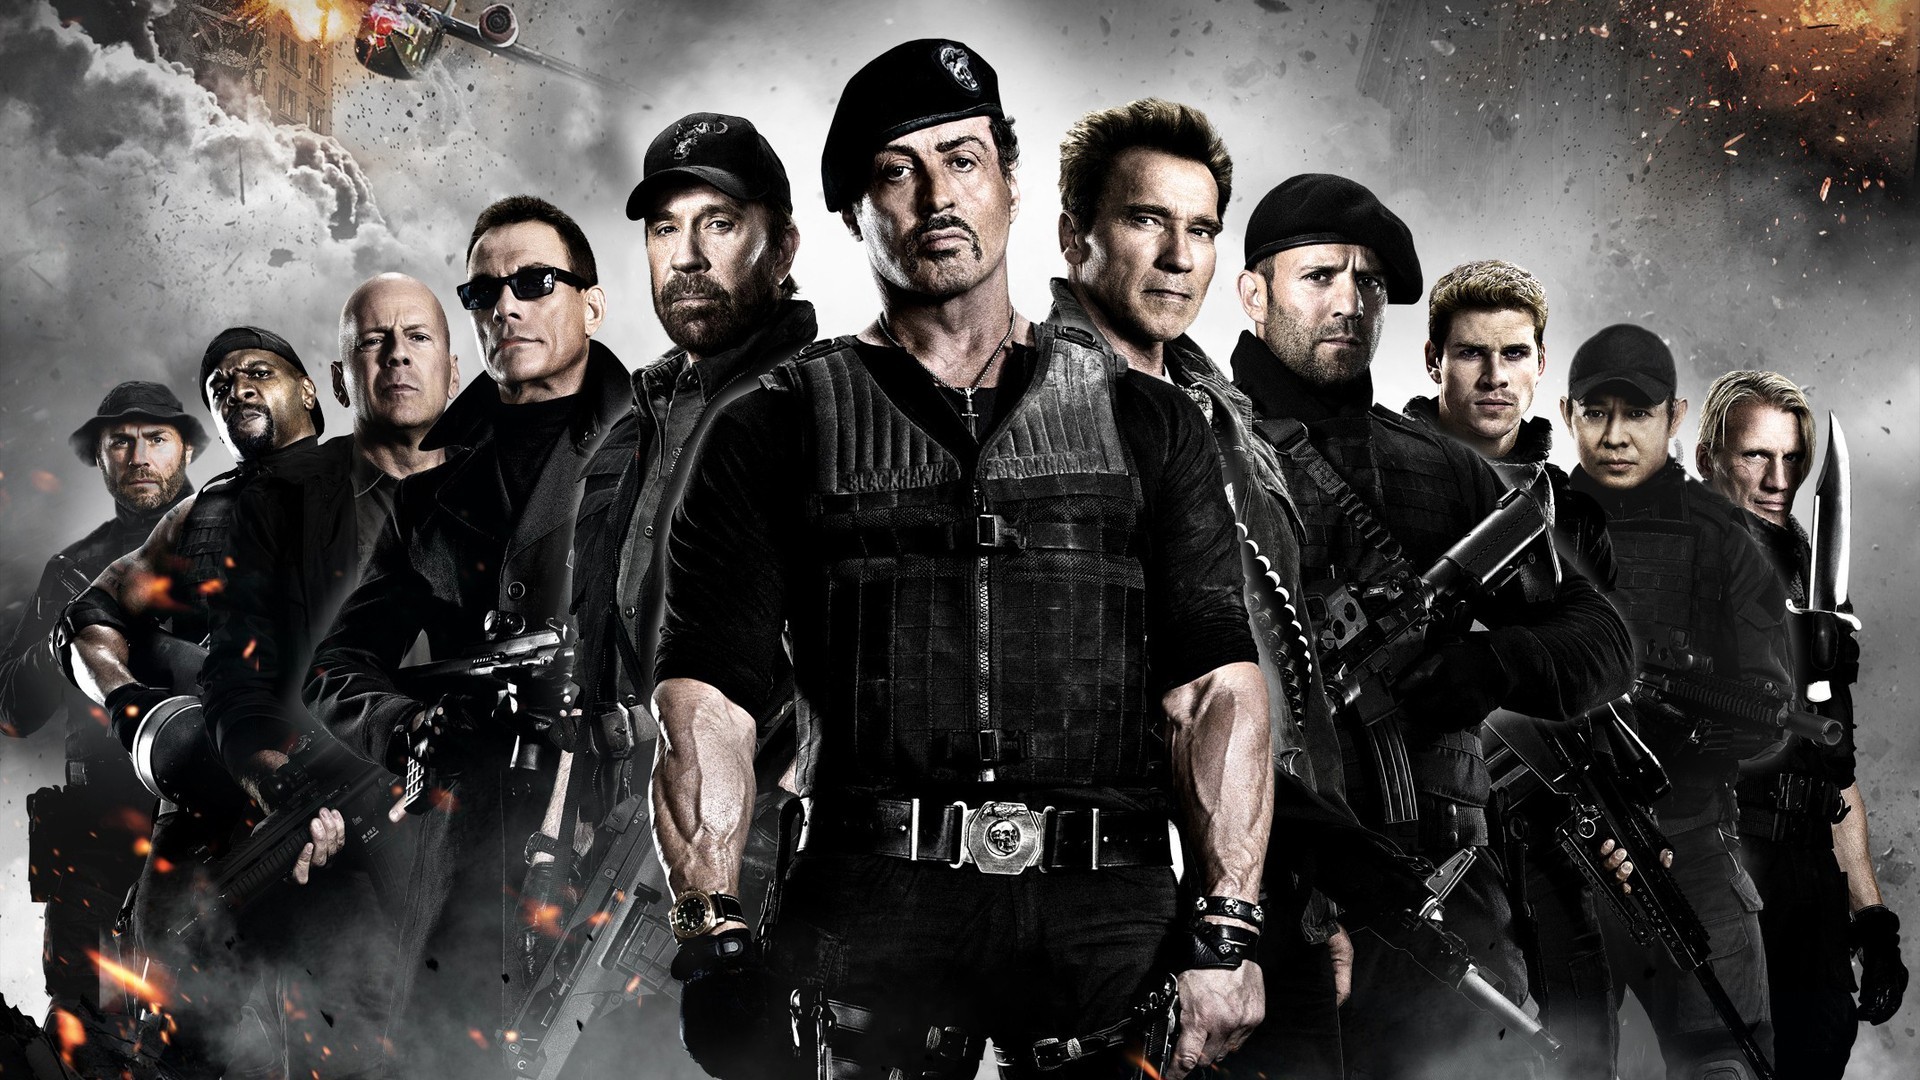 People 1920x1080 movies Sylvester Stallone Bruce Willis Arnold Schwarzenegger Jason Statham The Expendables 2 Chuck Norris movie poster men